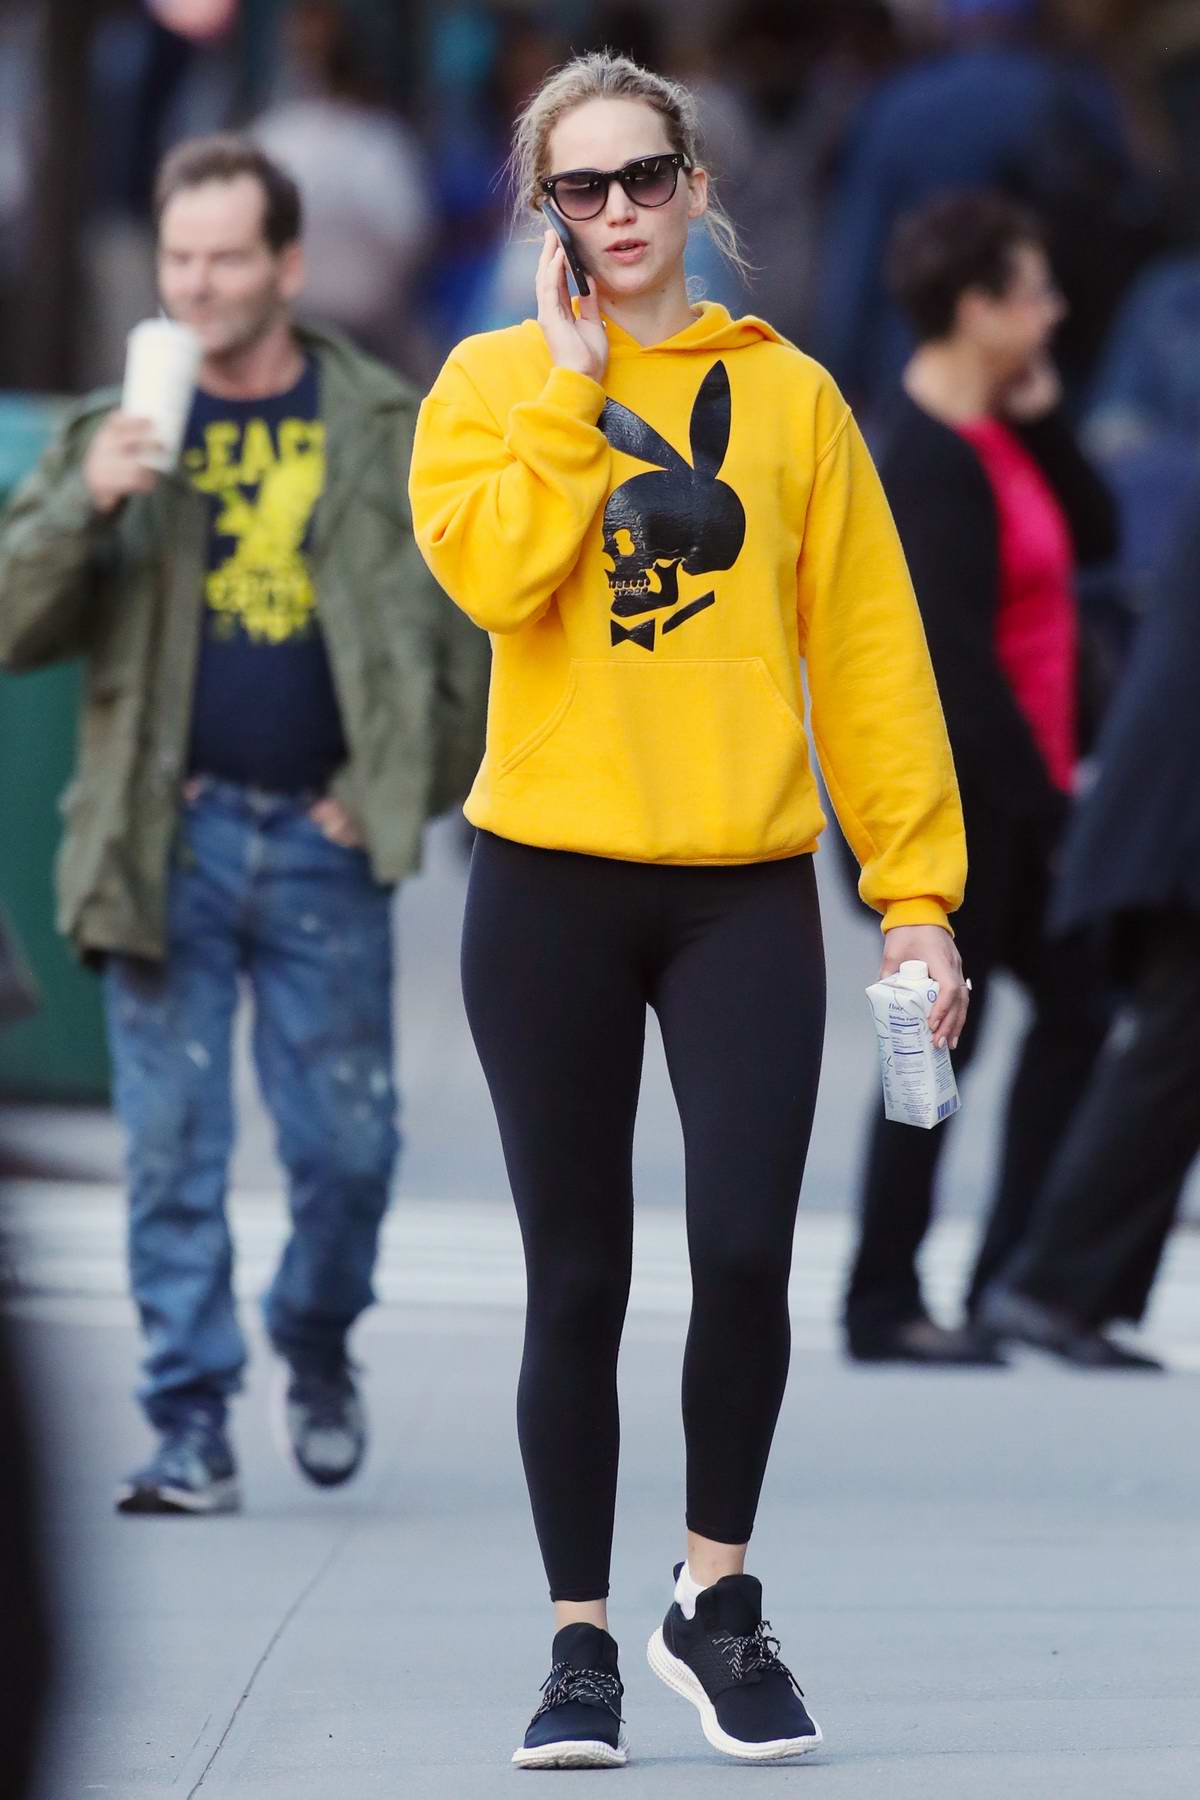 Jennifer Lawrence rocks a bright yellow hoodie and black leggings while  heading to the gym in